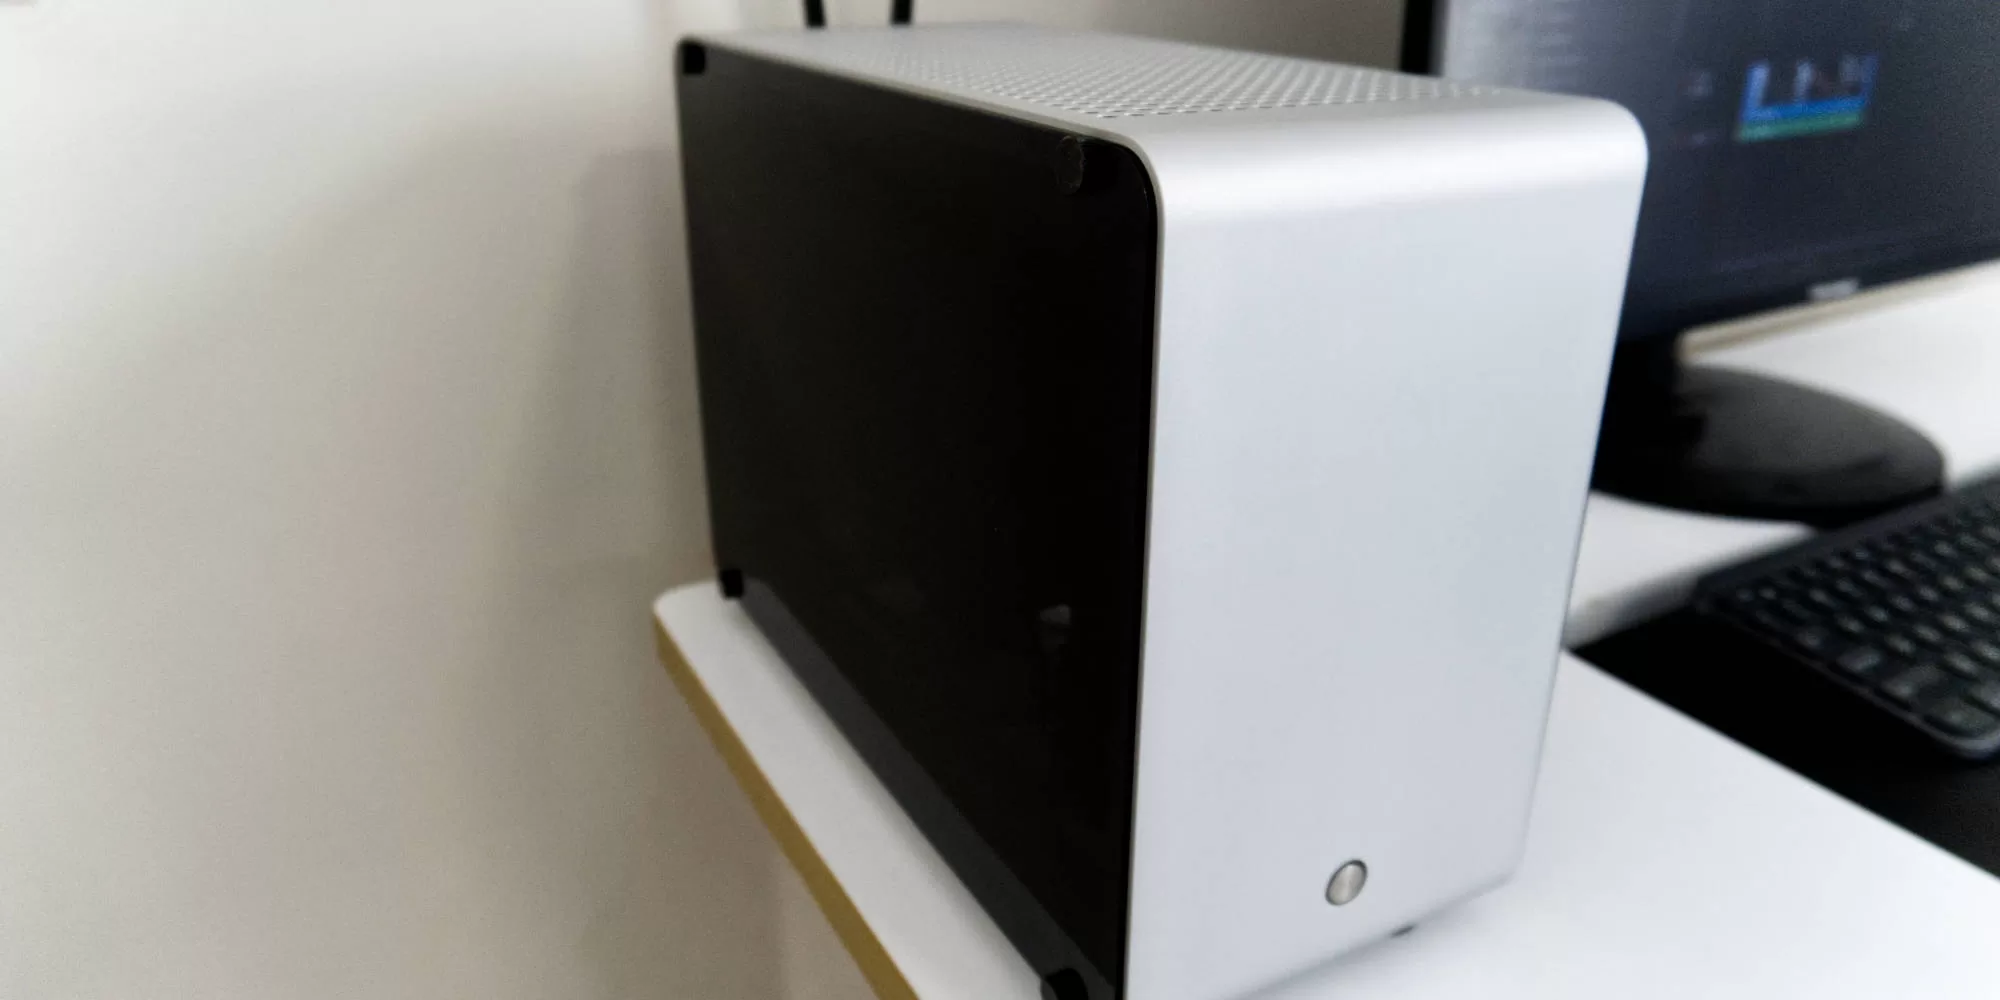 GEEEK G1 review – almost the perfect Mini-ITX PC case